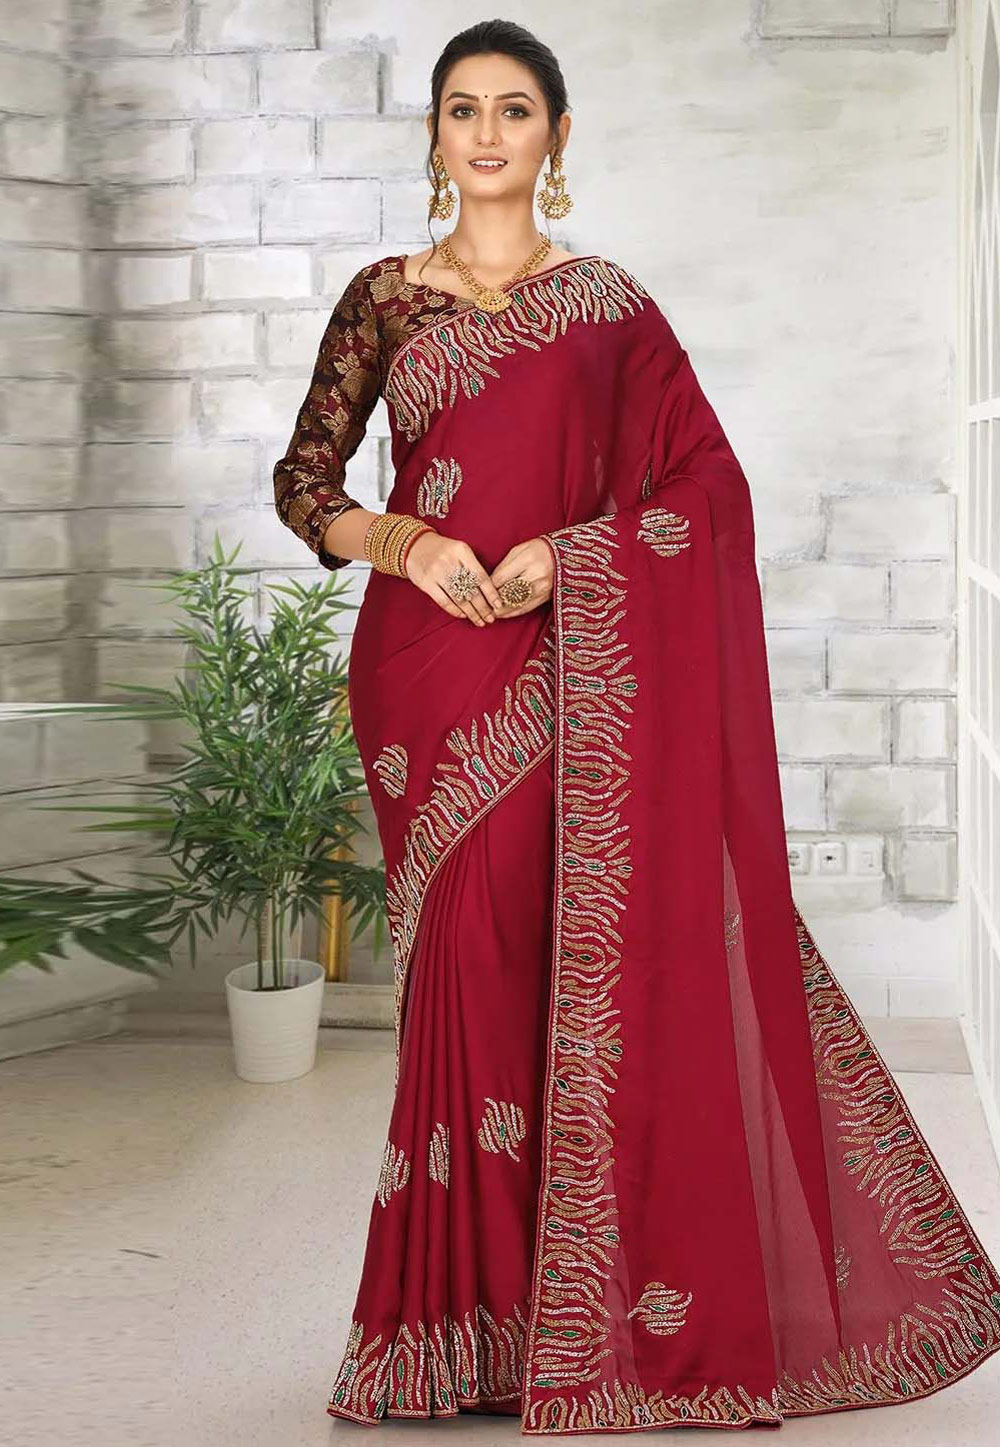 Magenta Satin Georgette Saree With Blouse 242910